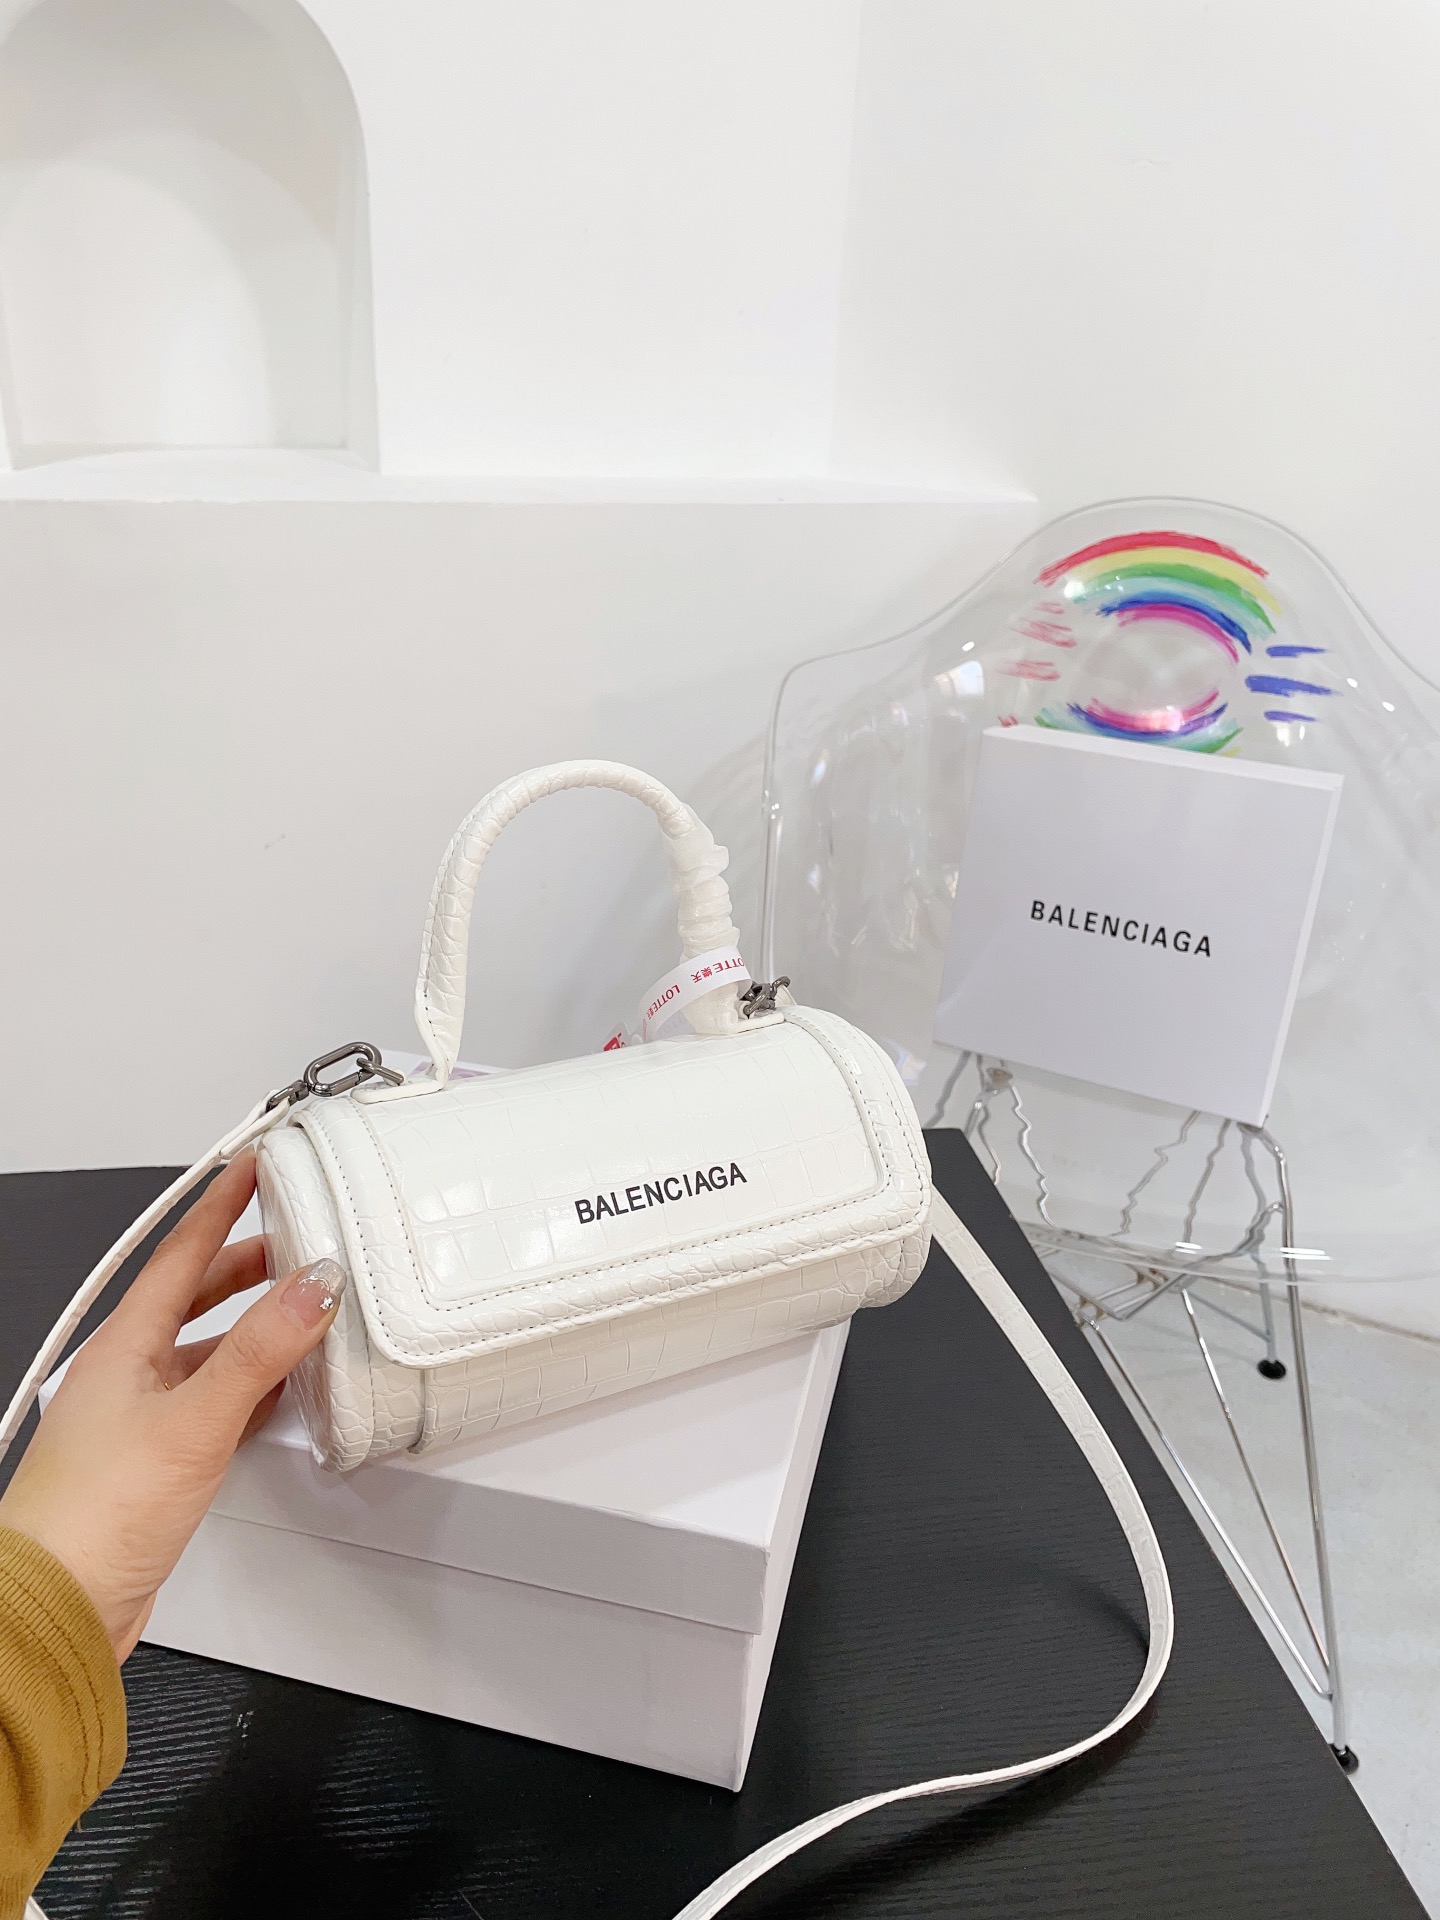 , Balenciaga Small Pillow Portable Bucket Bag in gift box is recommended. It has a simple and elegan